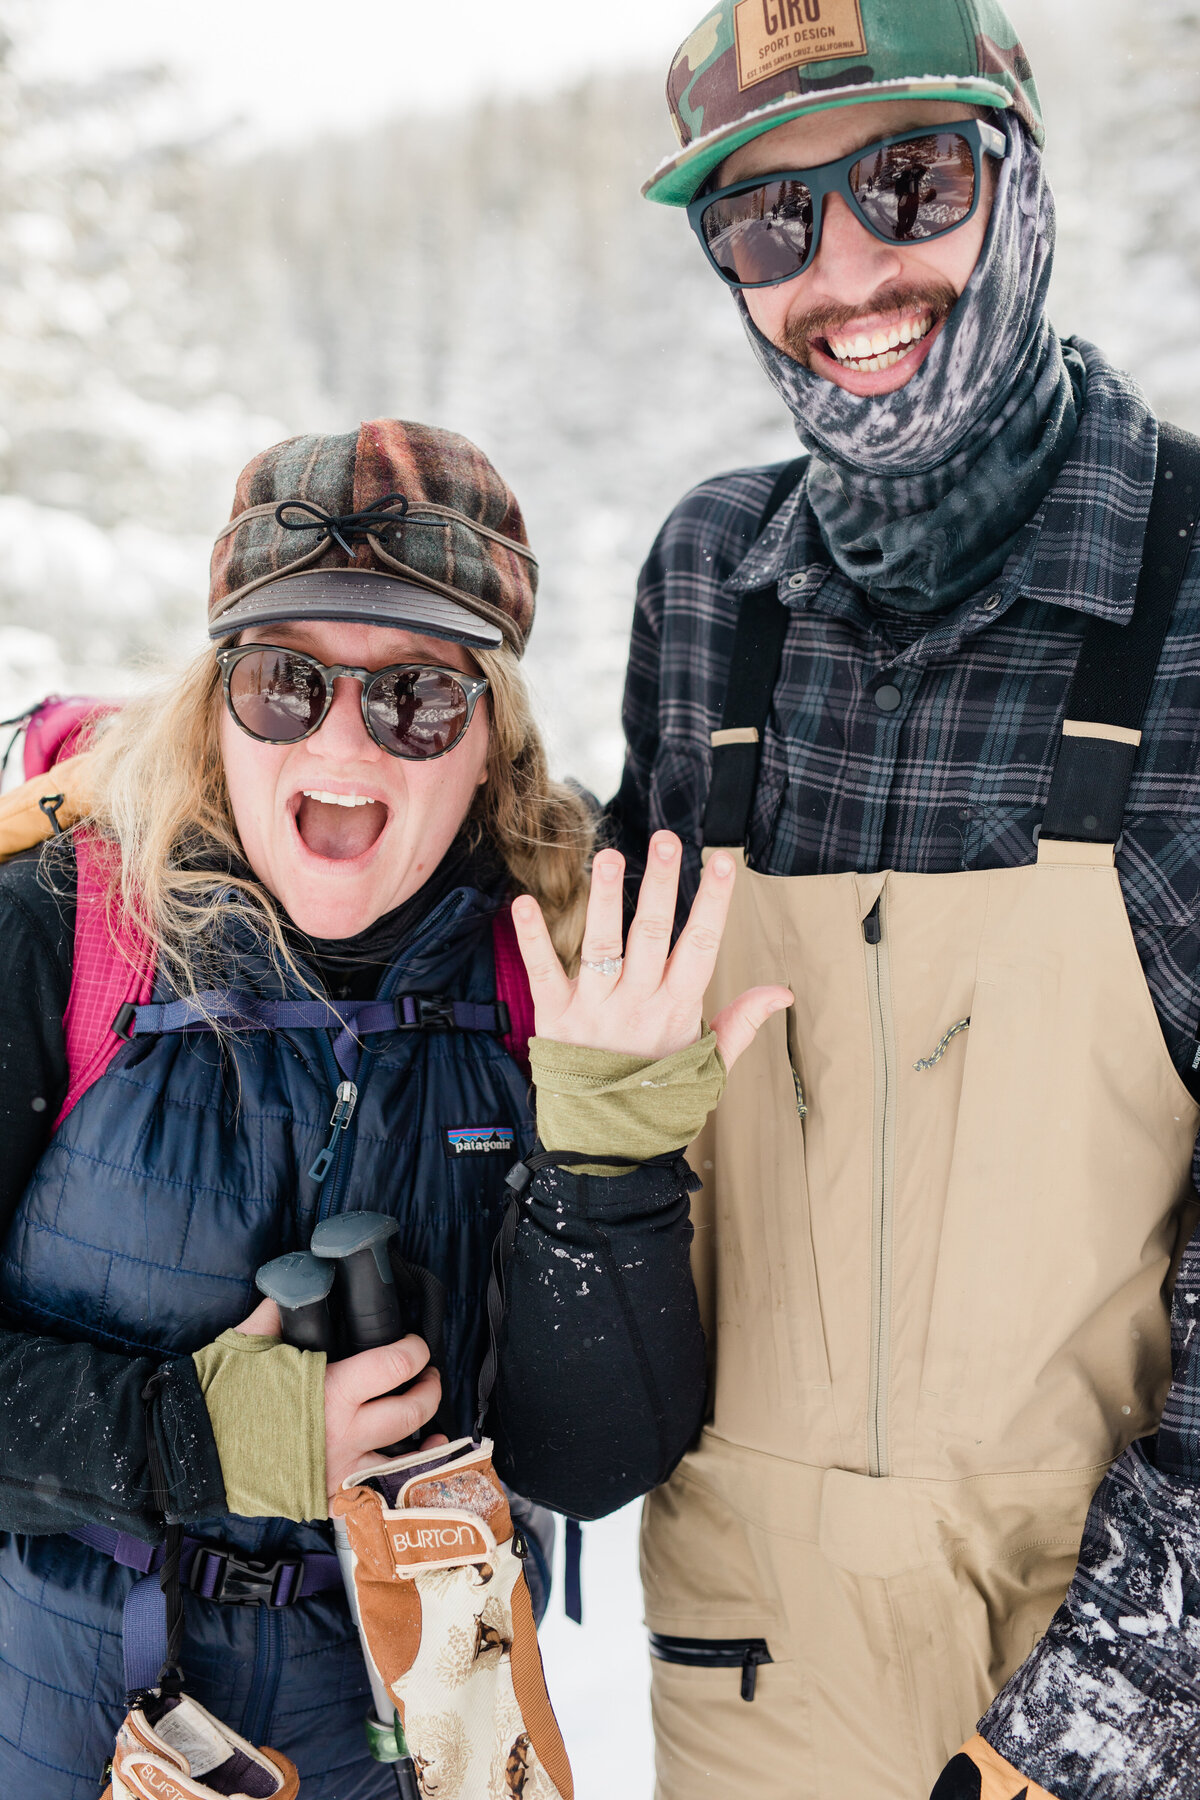 A woman in all backcountry gear excitedly shows off her new ring with her fiance smiling behind her